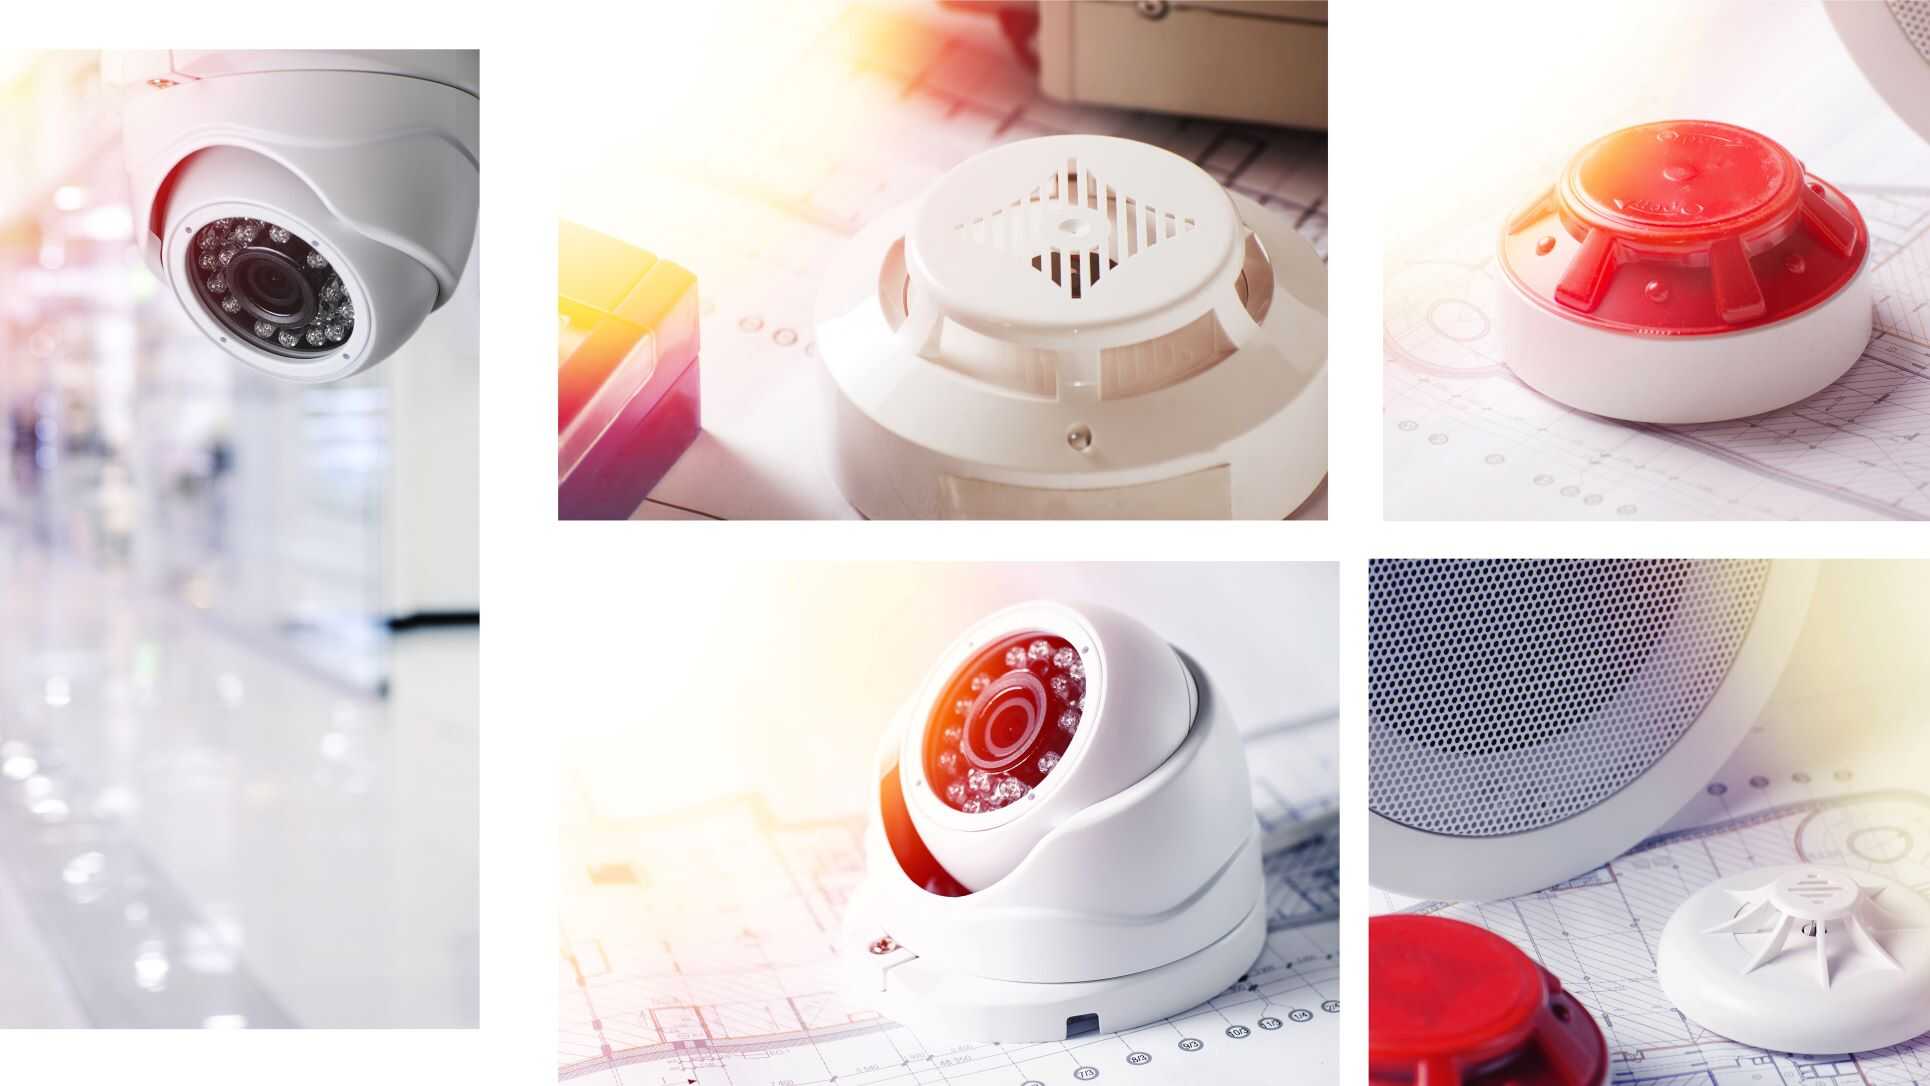 Fire and security alarms